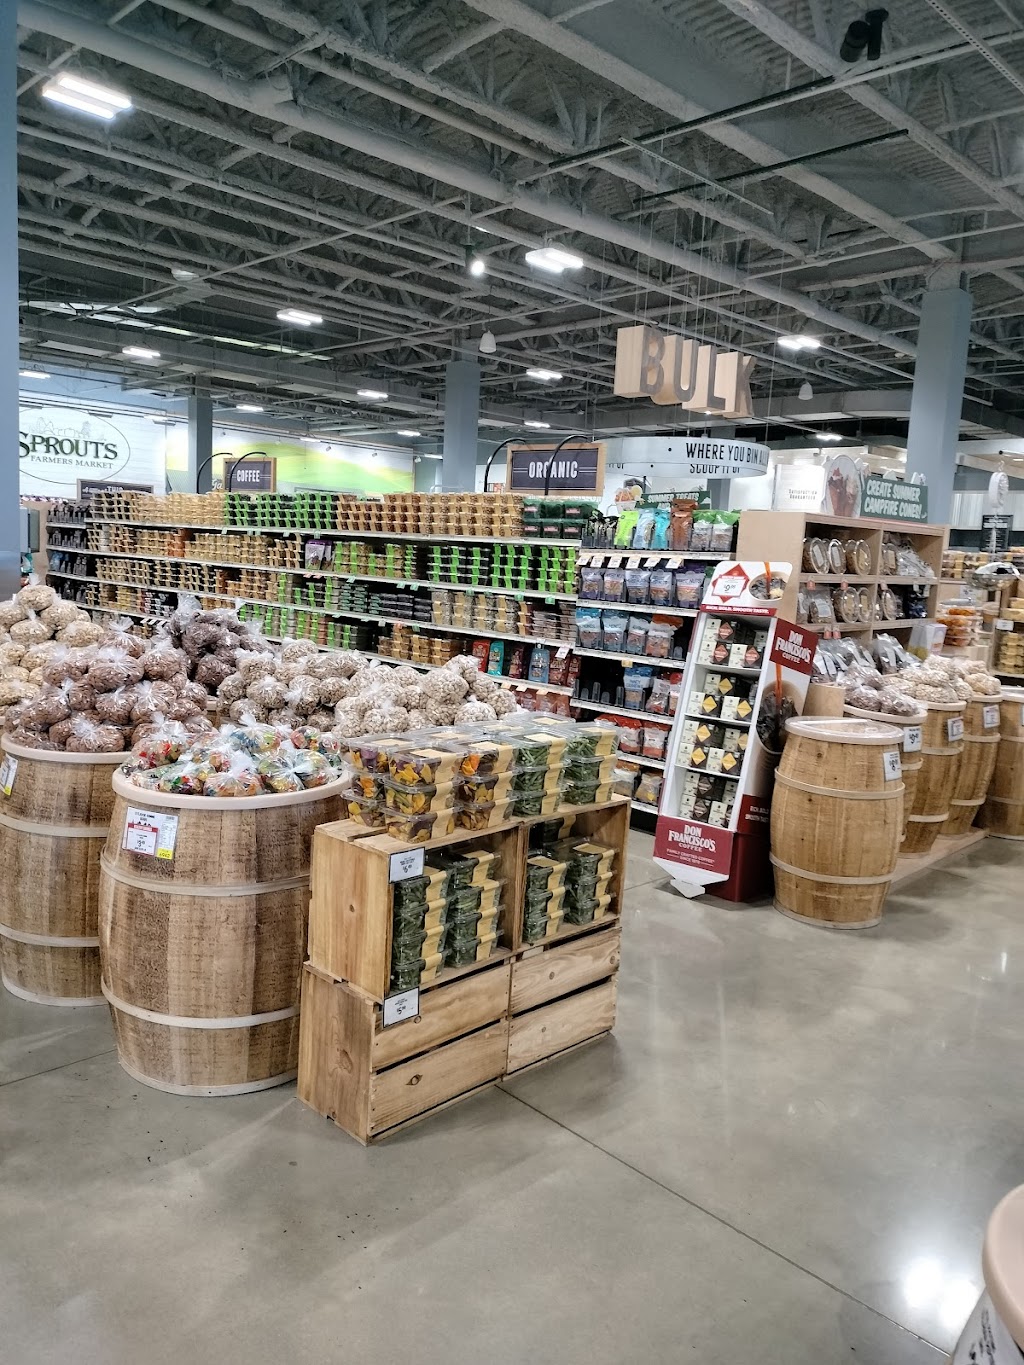 Sprouts Farmers Market | 2001 Welsh Rd, Dresher, PA 19025 | Phone: (267) 715-0602